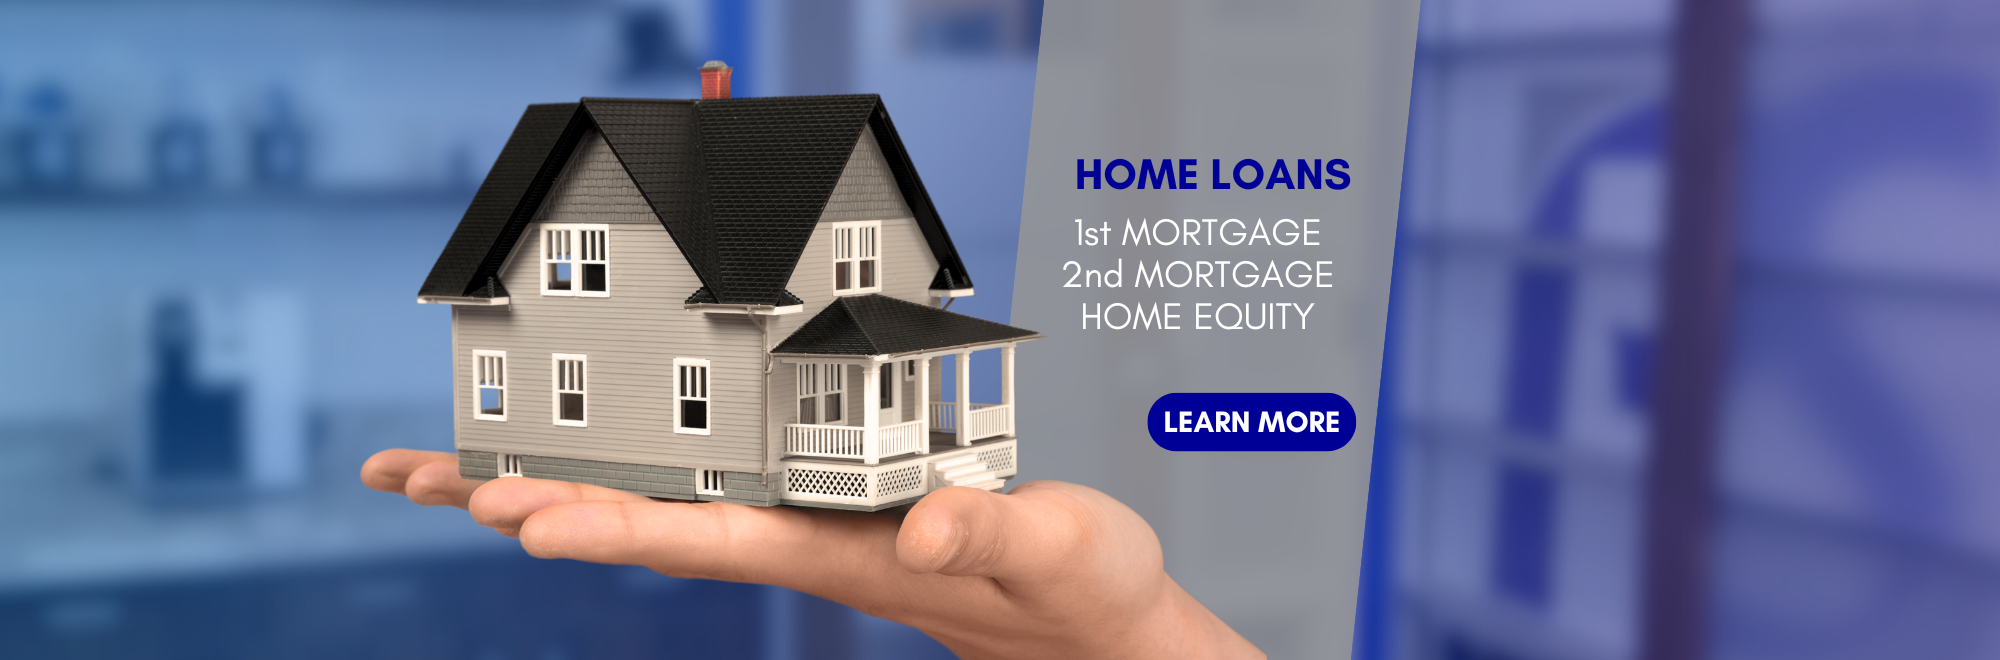 Home Loans 1st Mortgage 2nd Mortgage Home Equity Click to learn more